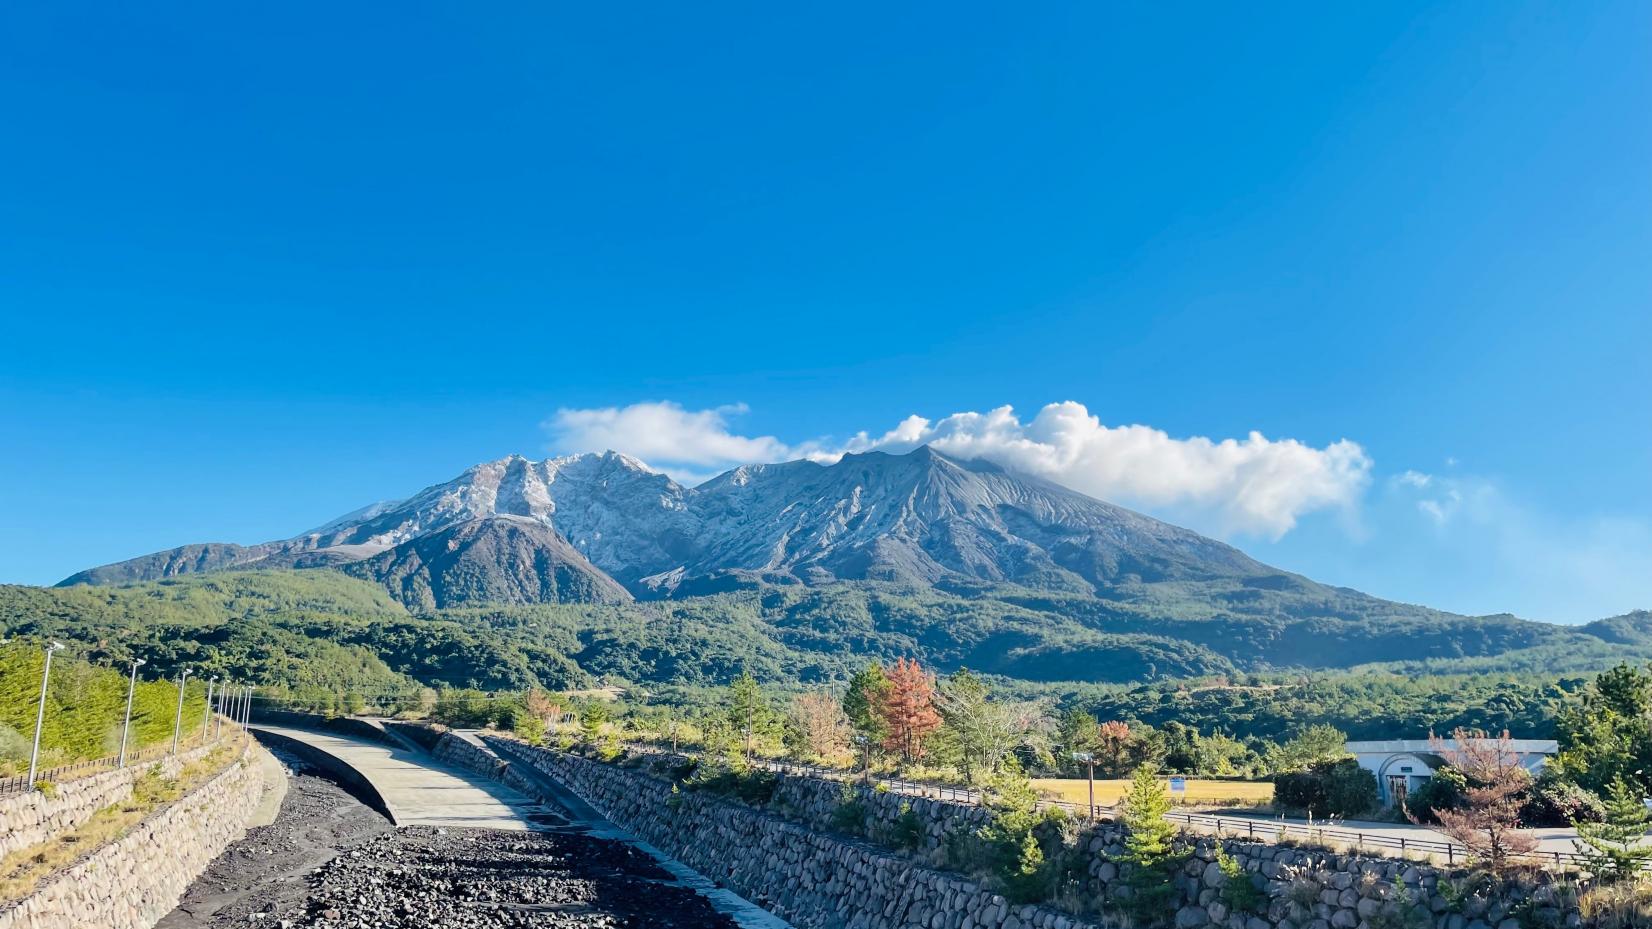 Getting very close to the crater of Sakurajima on an E-bike trip that is only possible with a guide-2